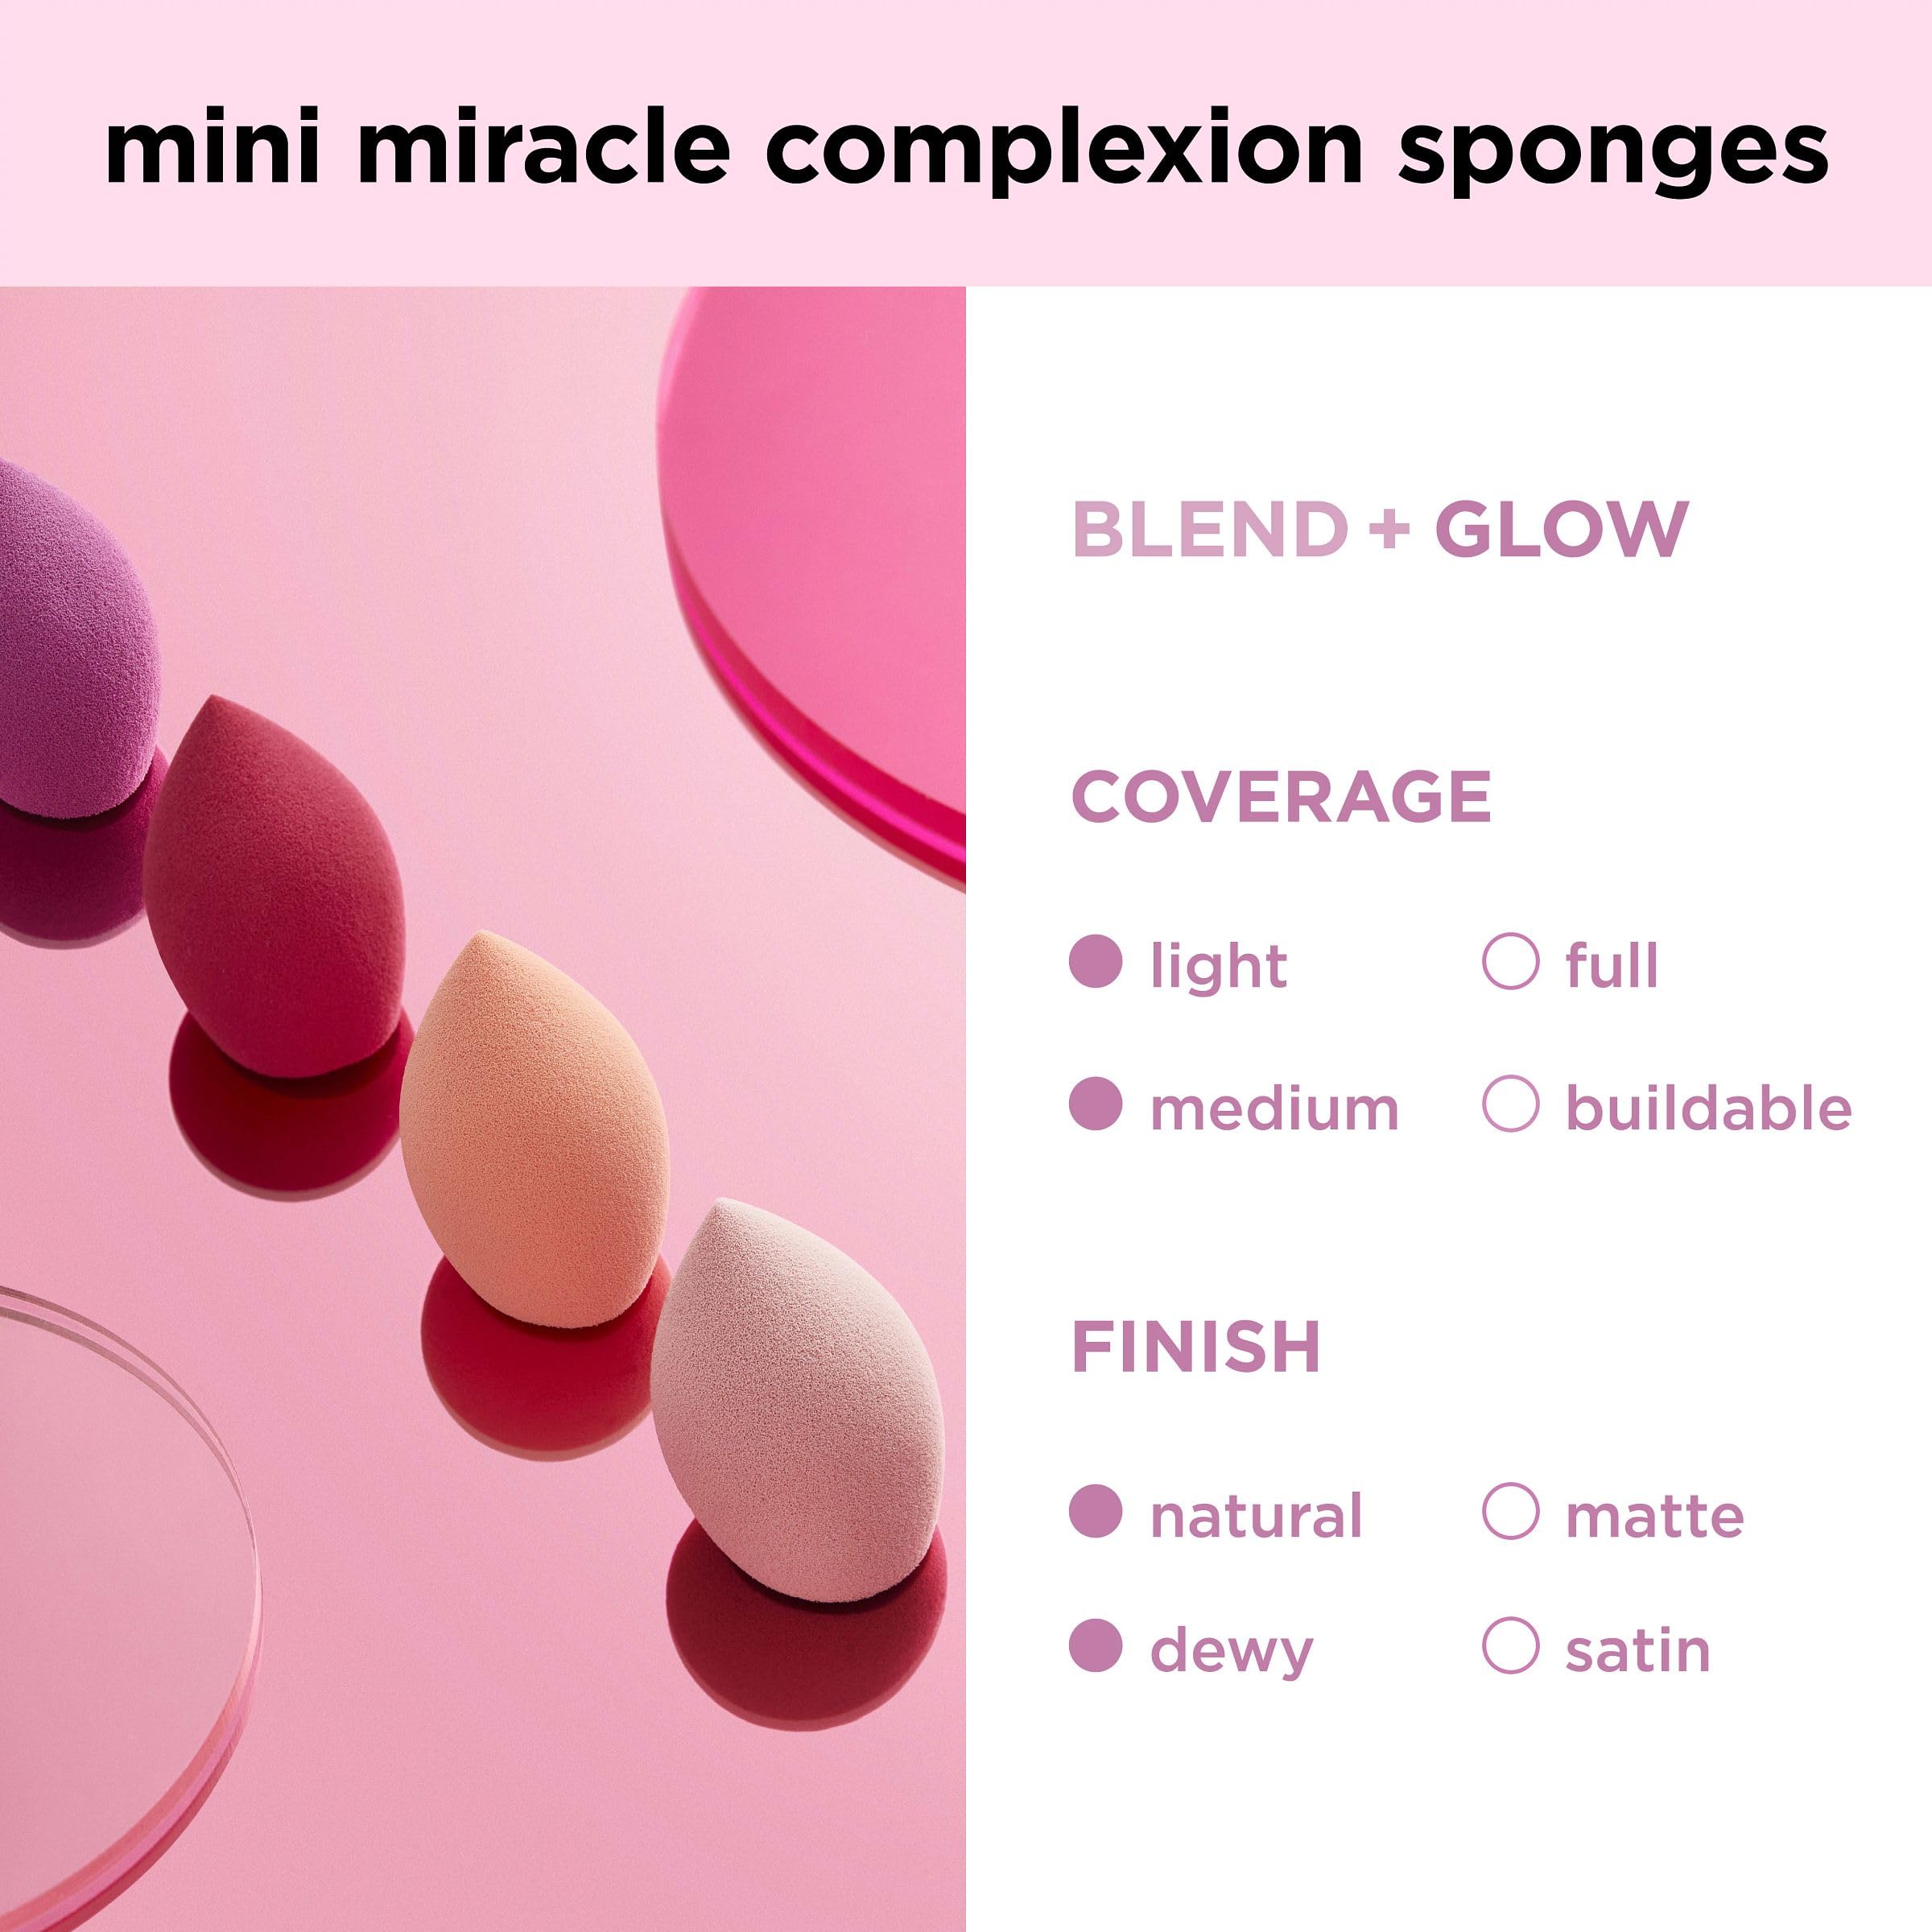 Real Techniques Mini Miracle Complexion Sponges, Small Makeup Blending Sponges, For Foundation & Concealer, Mini Size for Under Eyes & Touch-Ups, Natural Makeup, Packaging May Vary, 4 Count